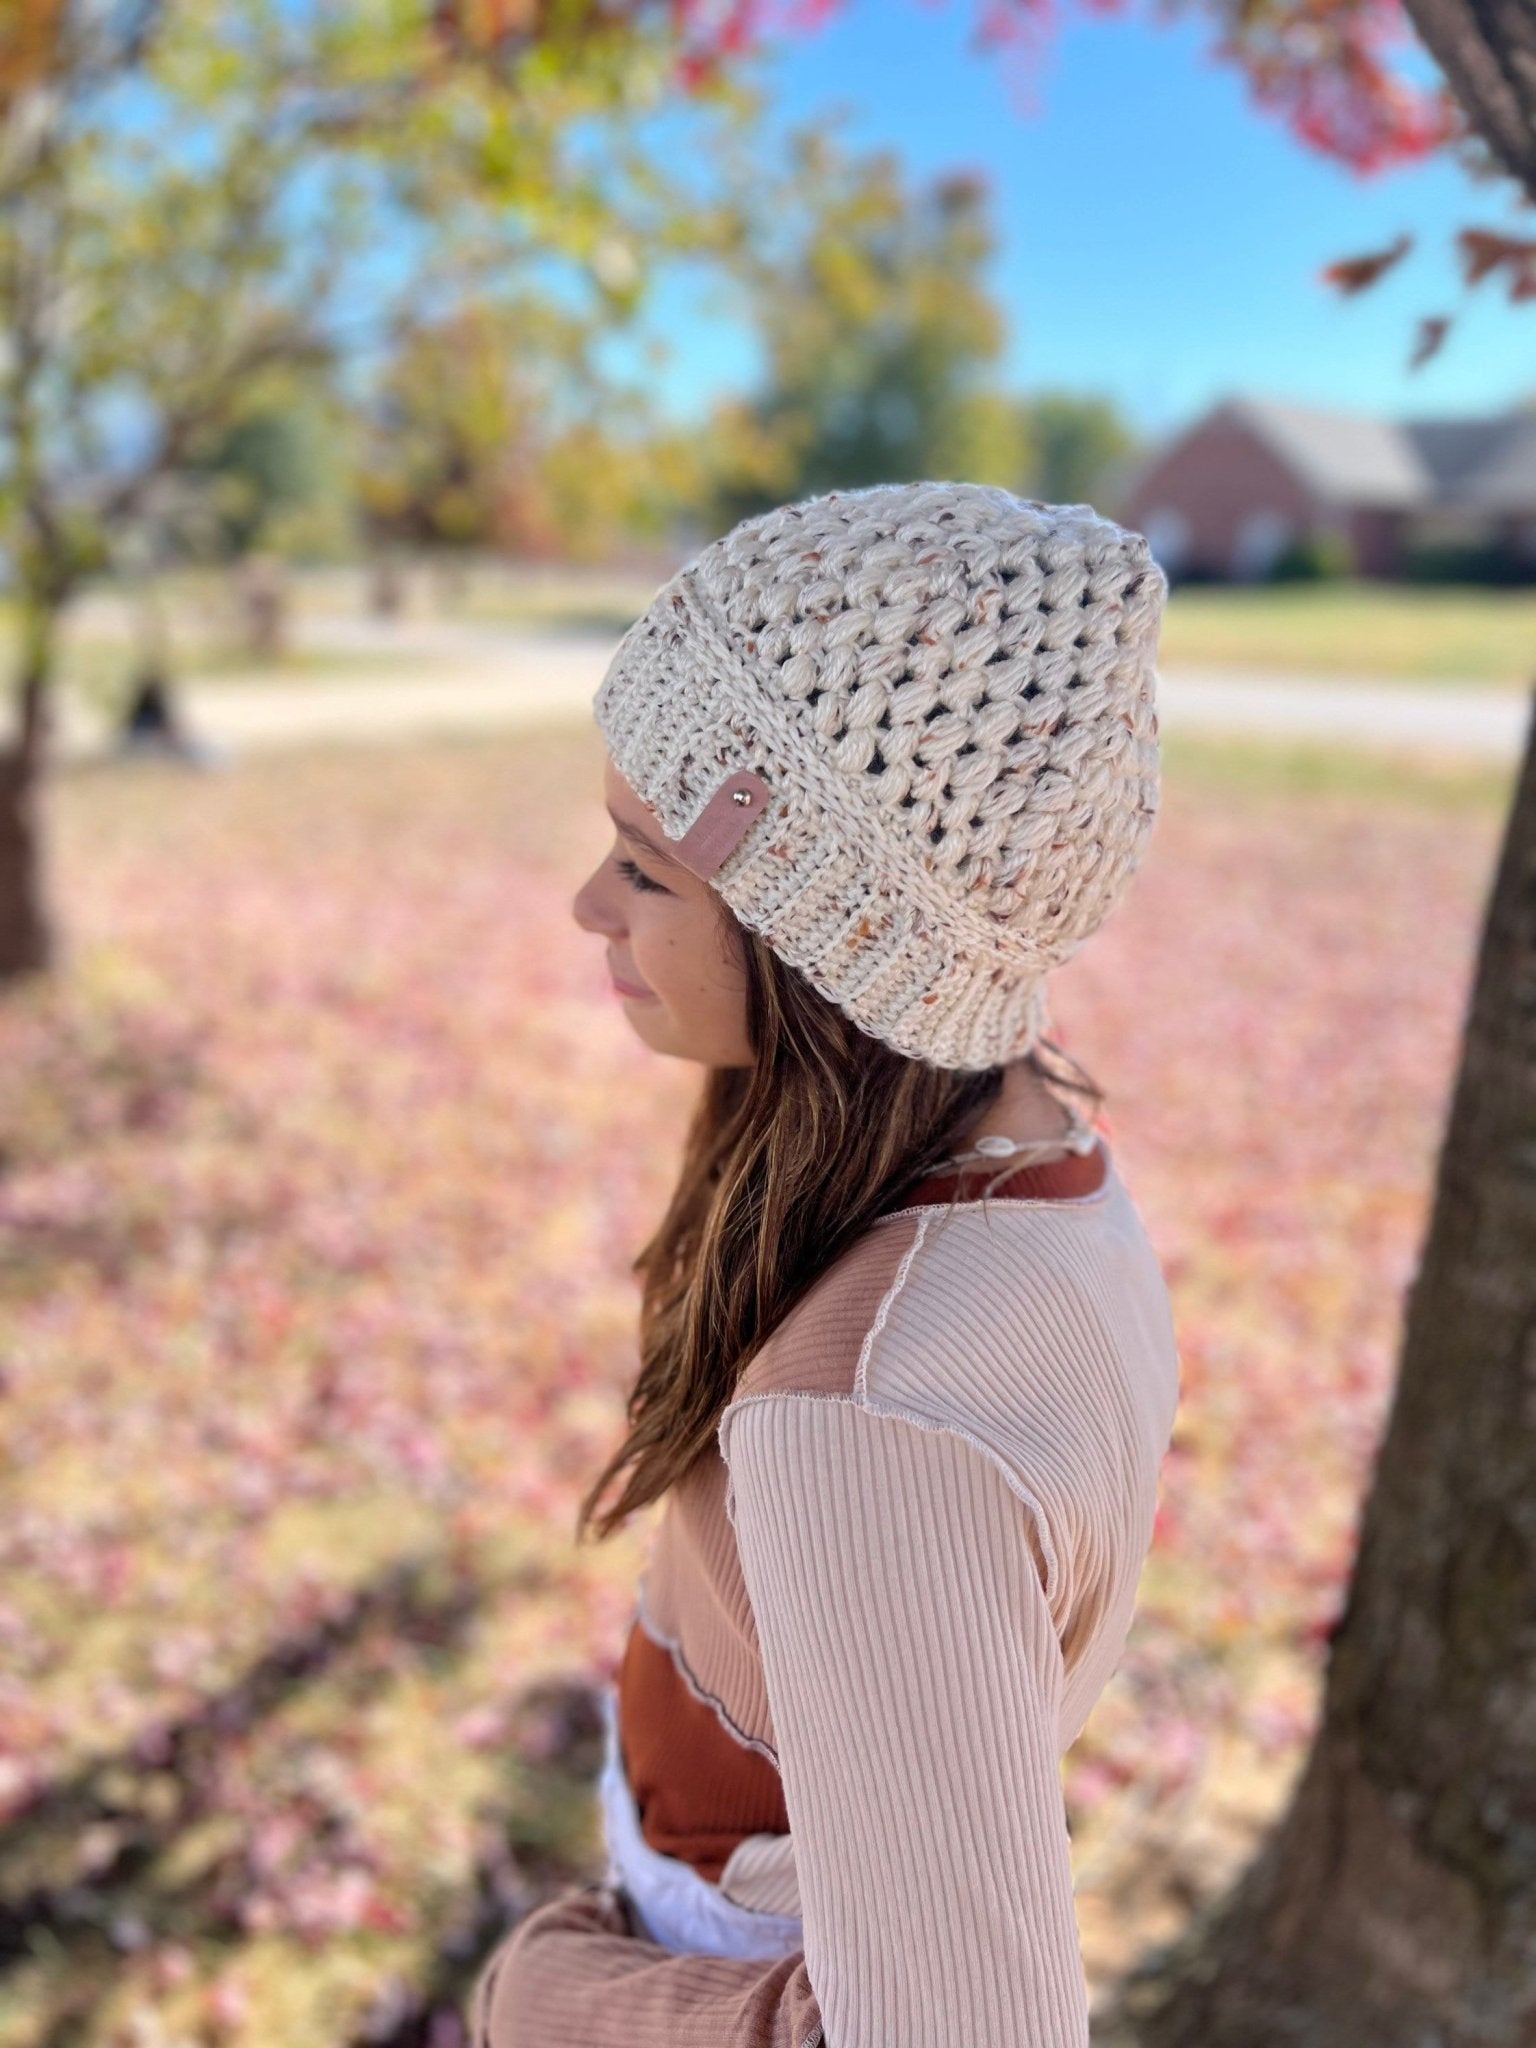 Crochet hat for girl, fall or winter weather hat - Lilly Grace Sparkle Boutique